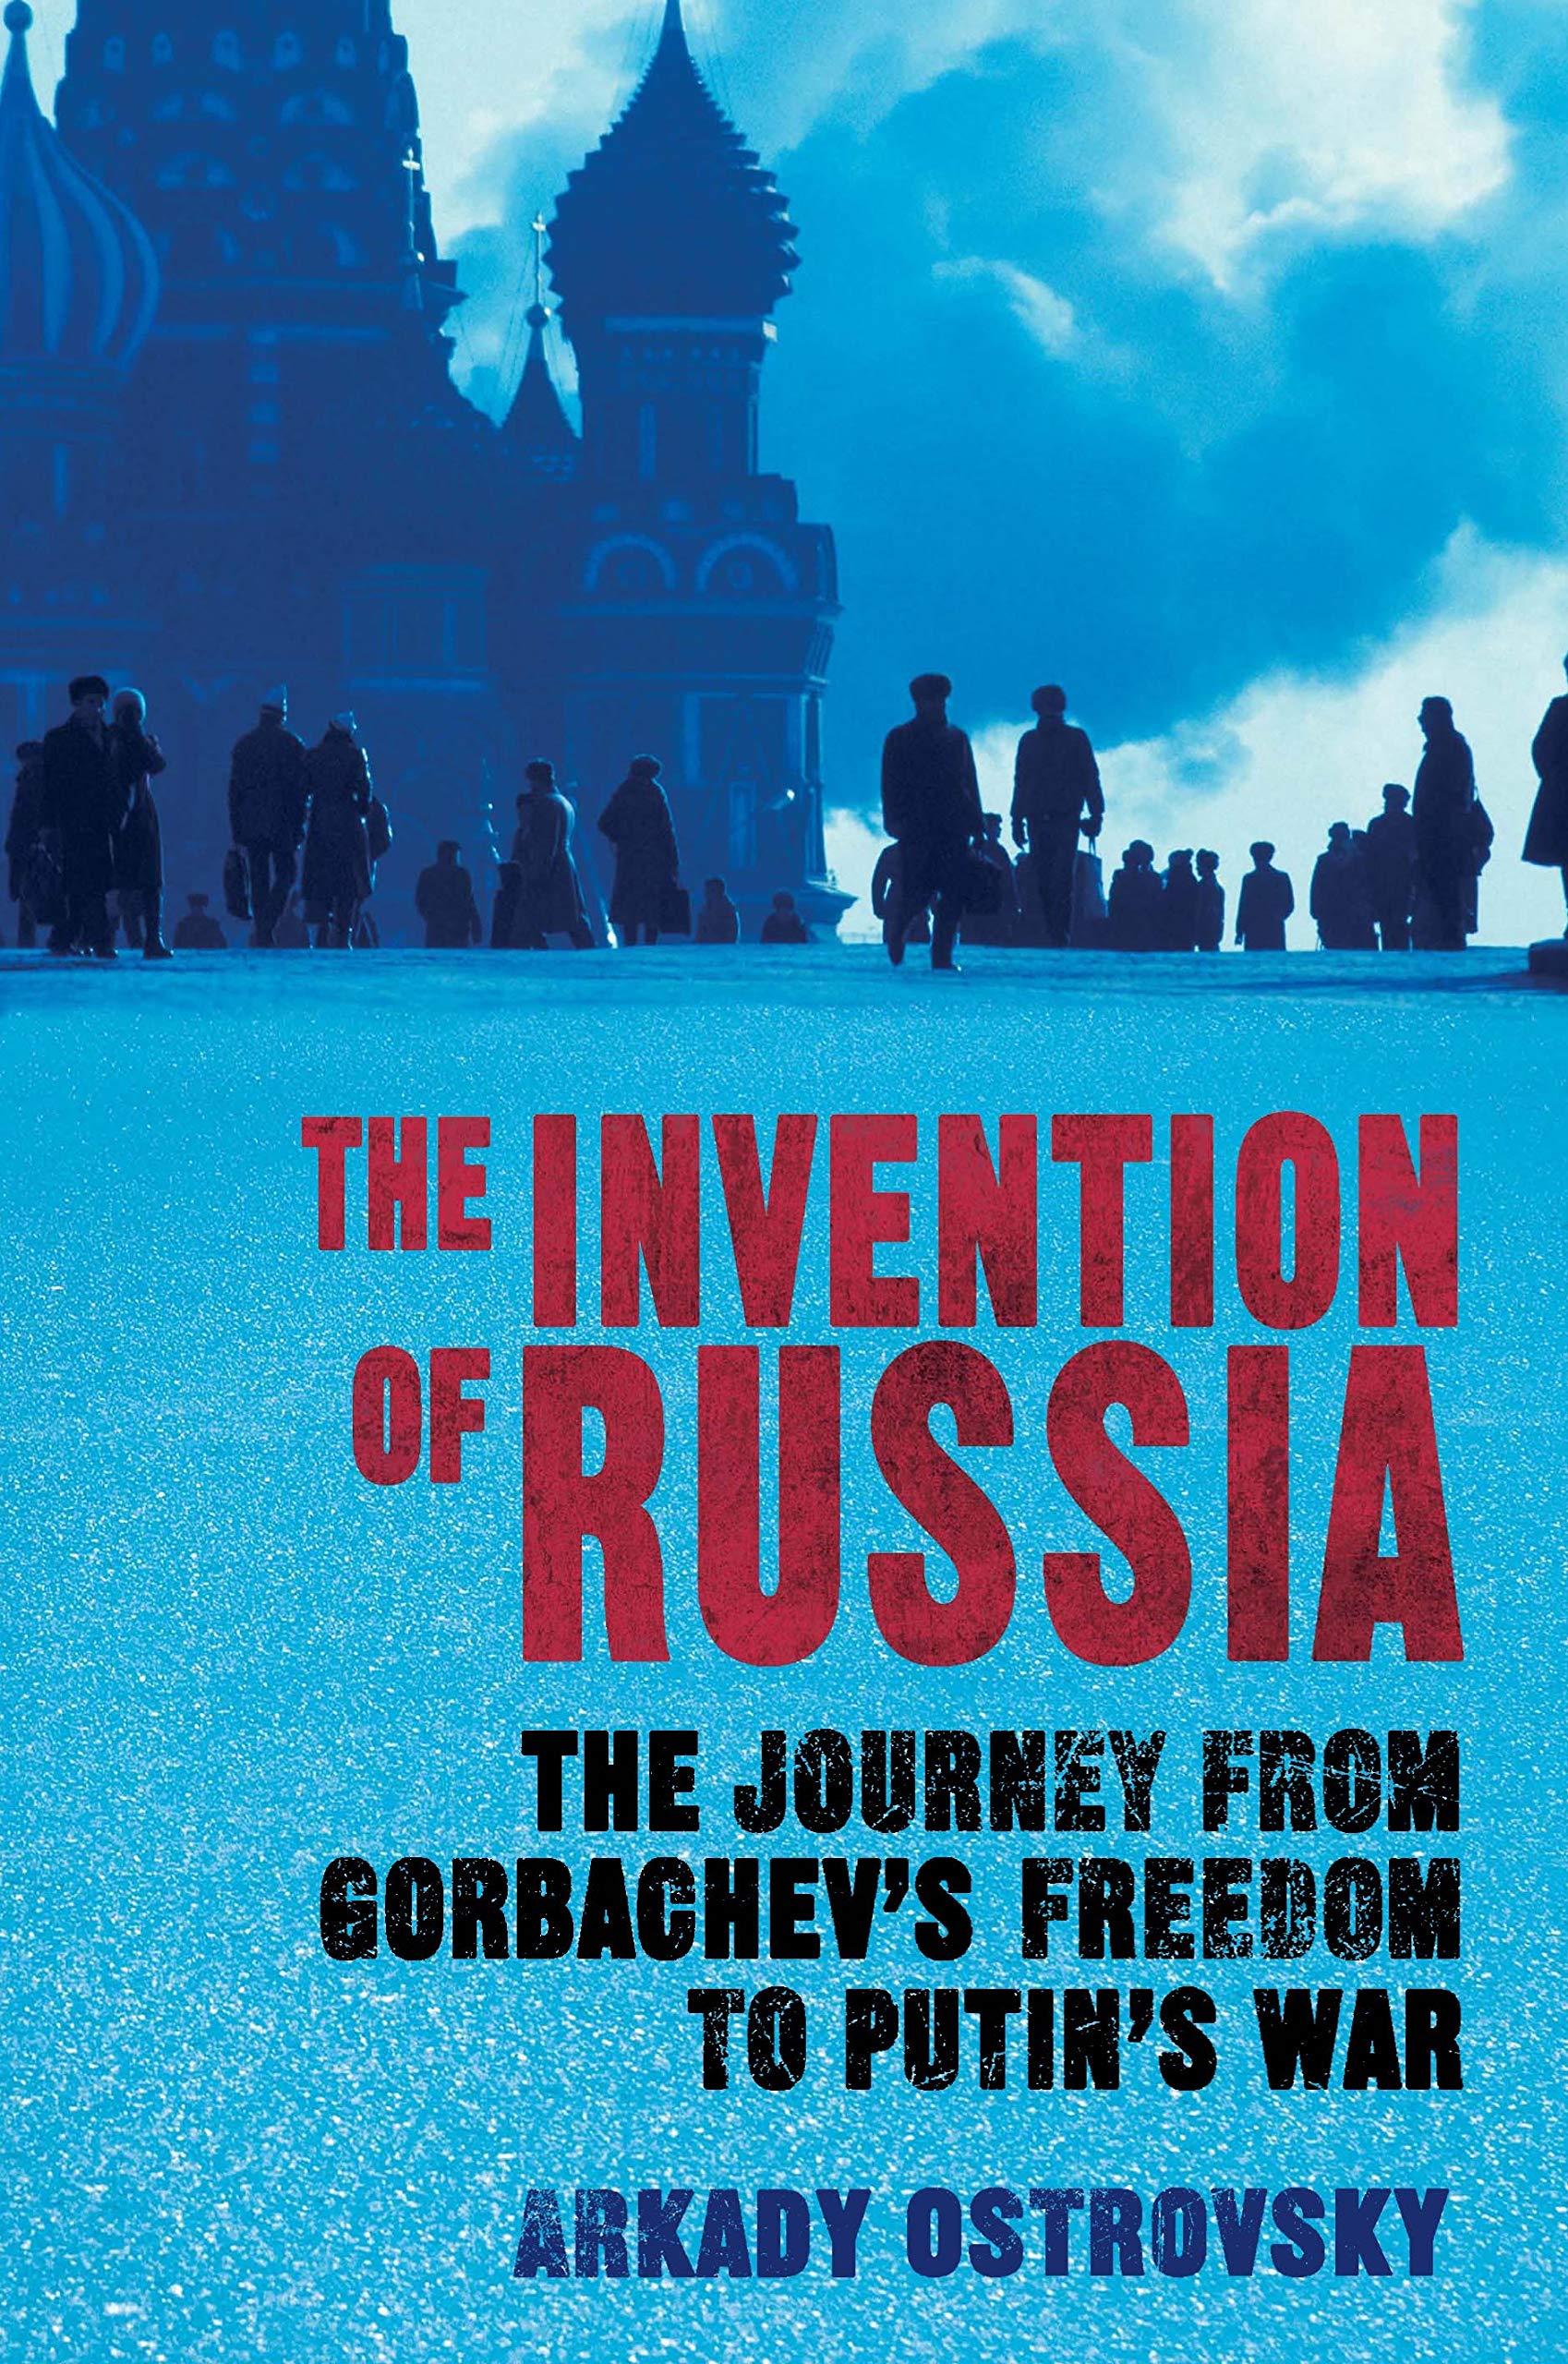 The Invention of Russia - Arkady Ostrovsky